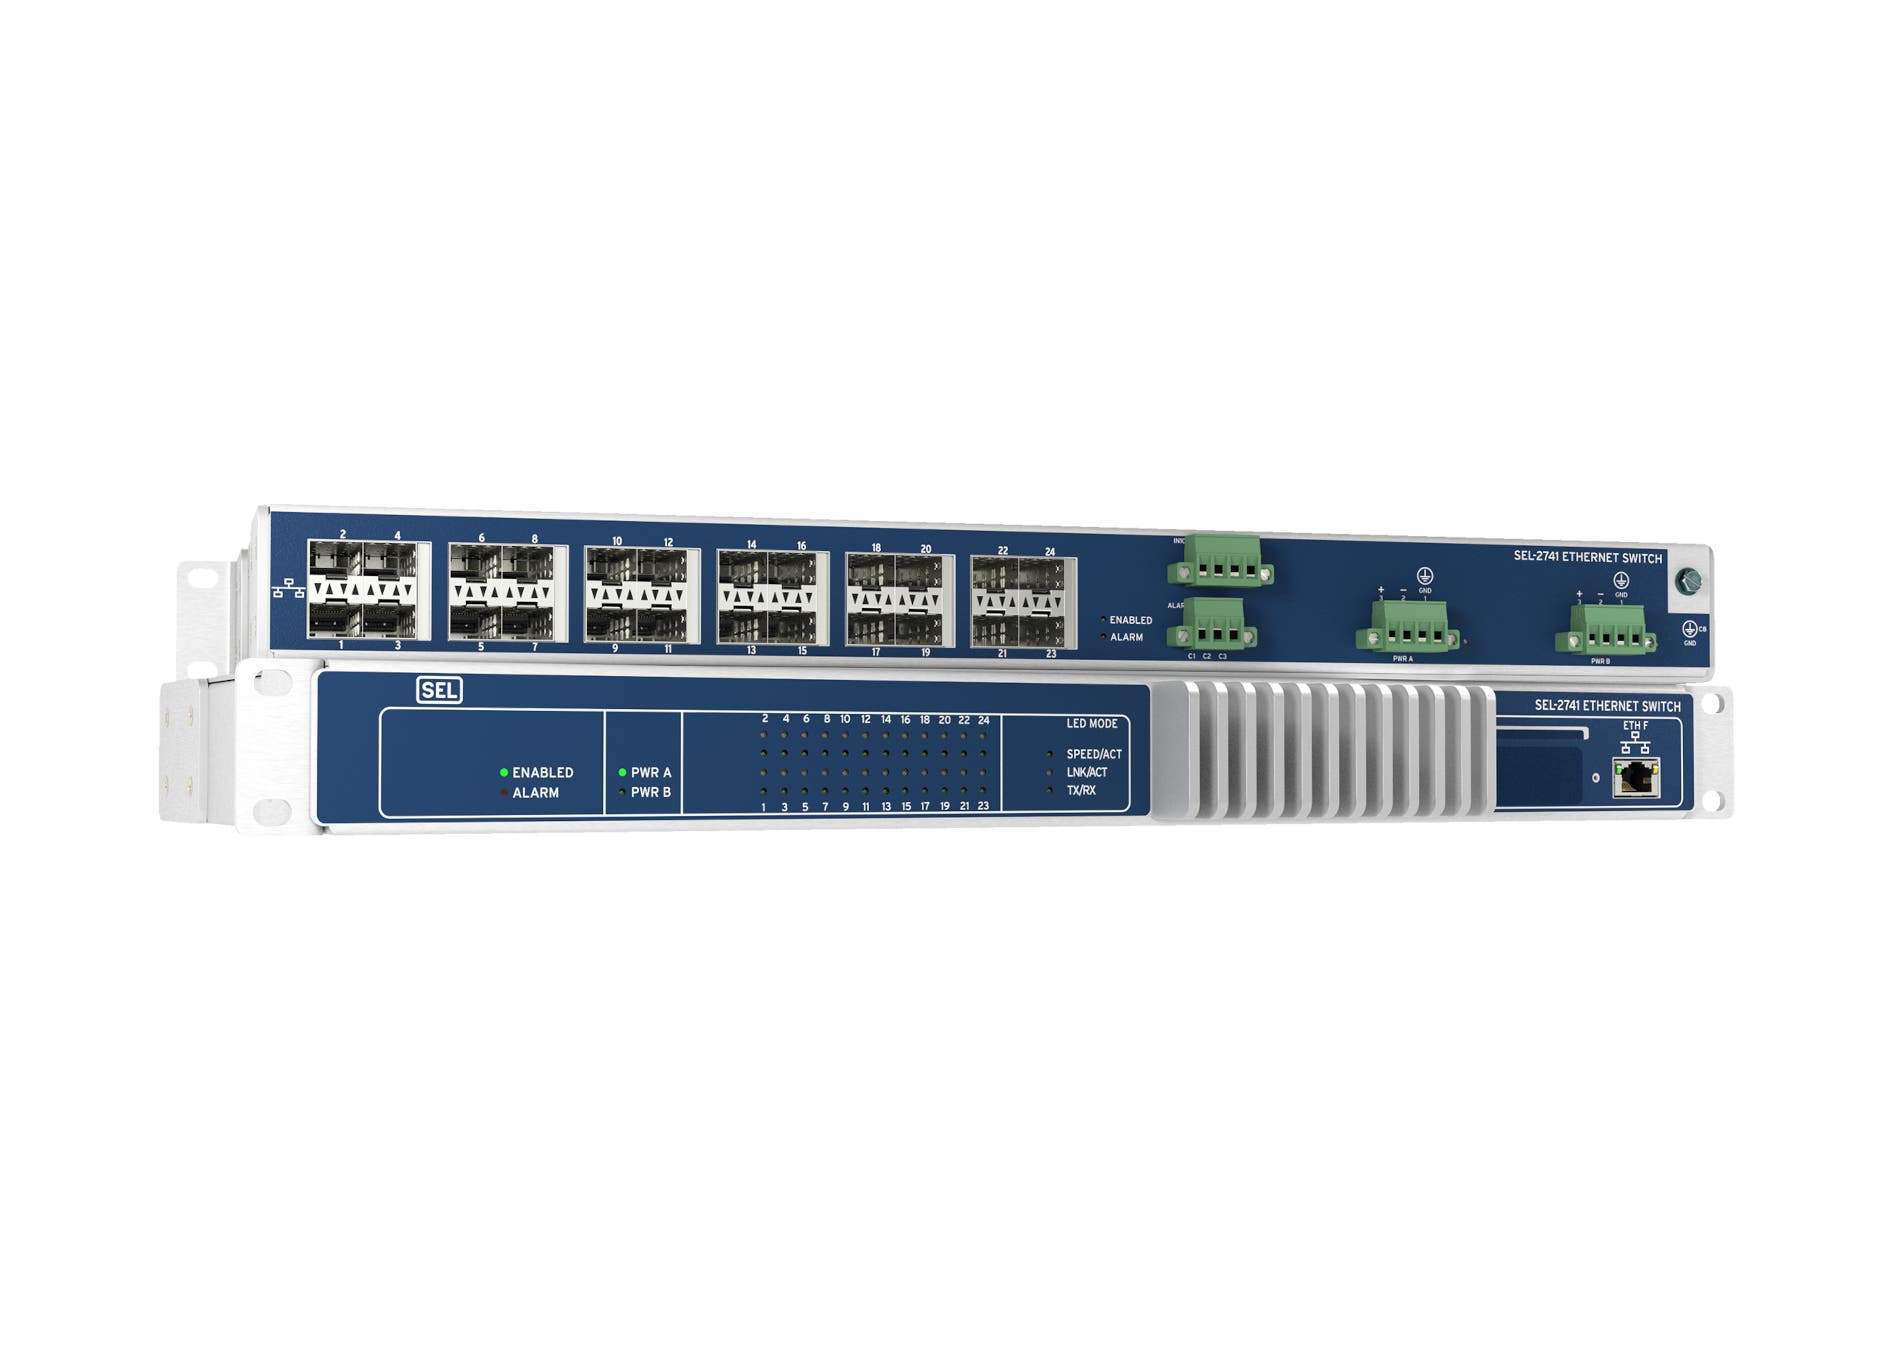 New OT SDN switch increases speed, port count